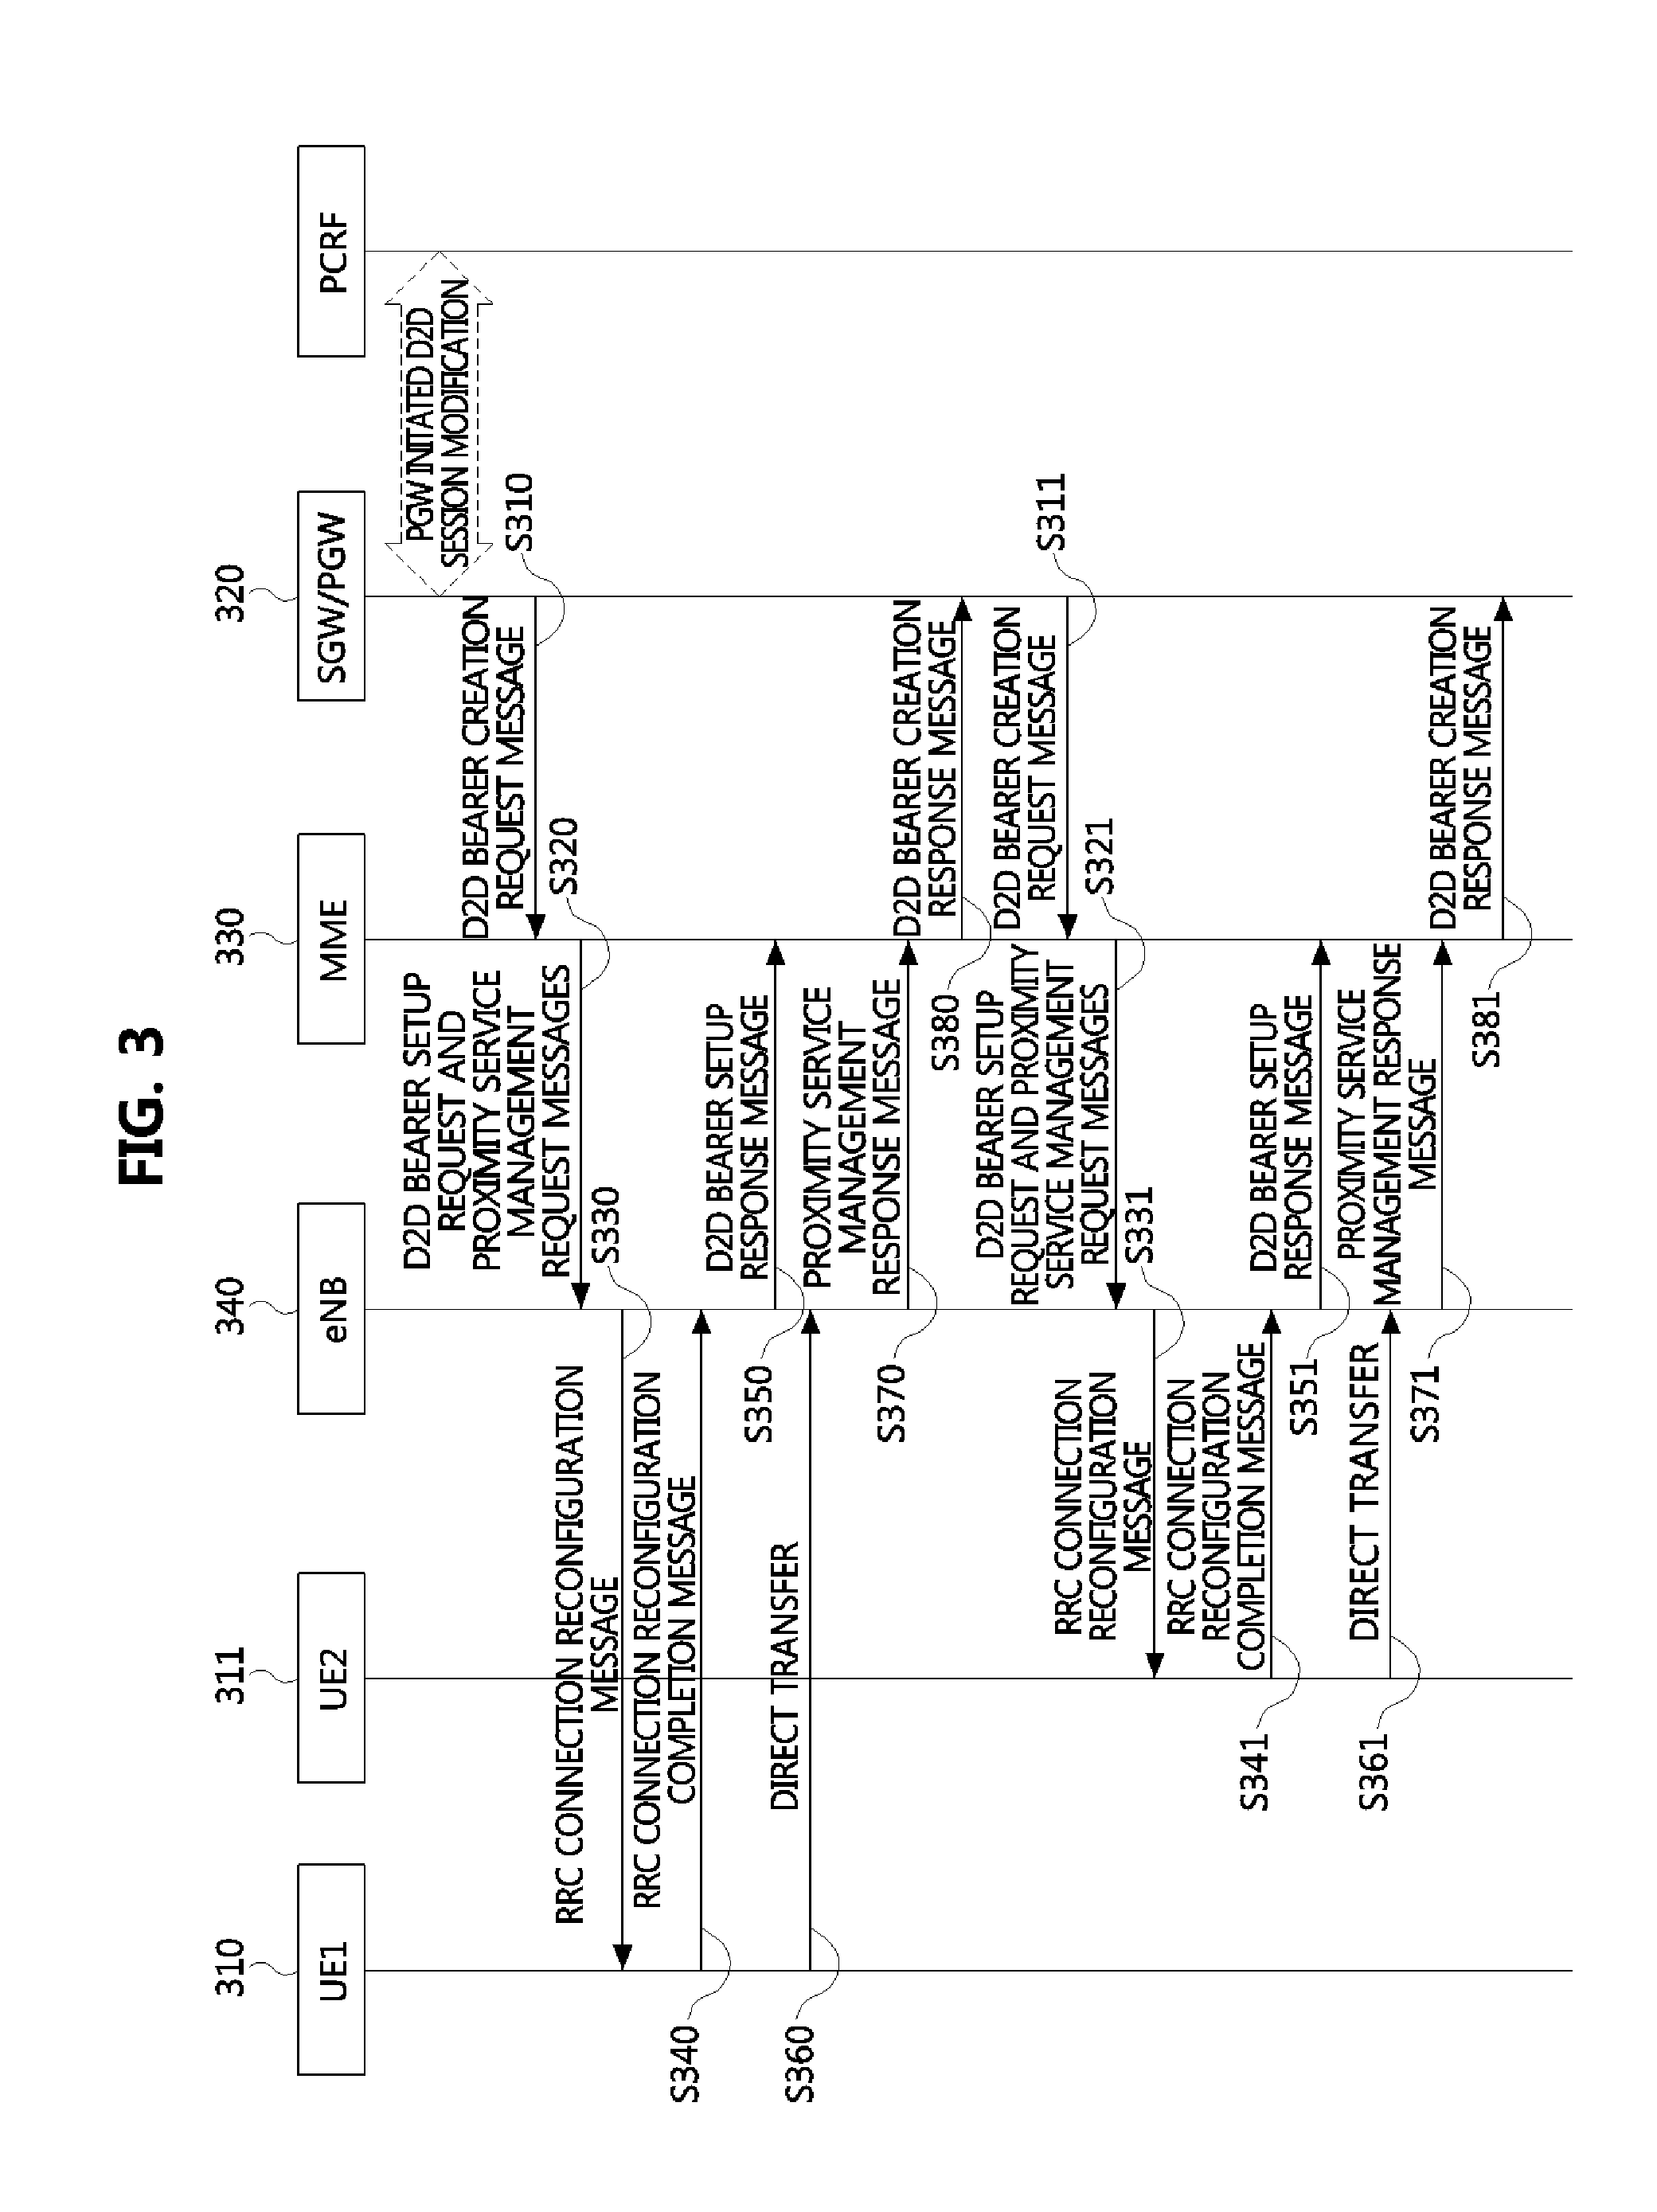 Method of providing service continuity between cellular communication and device-to-device communication